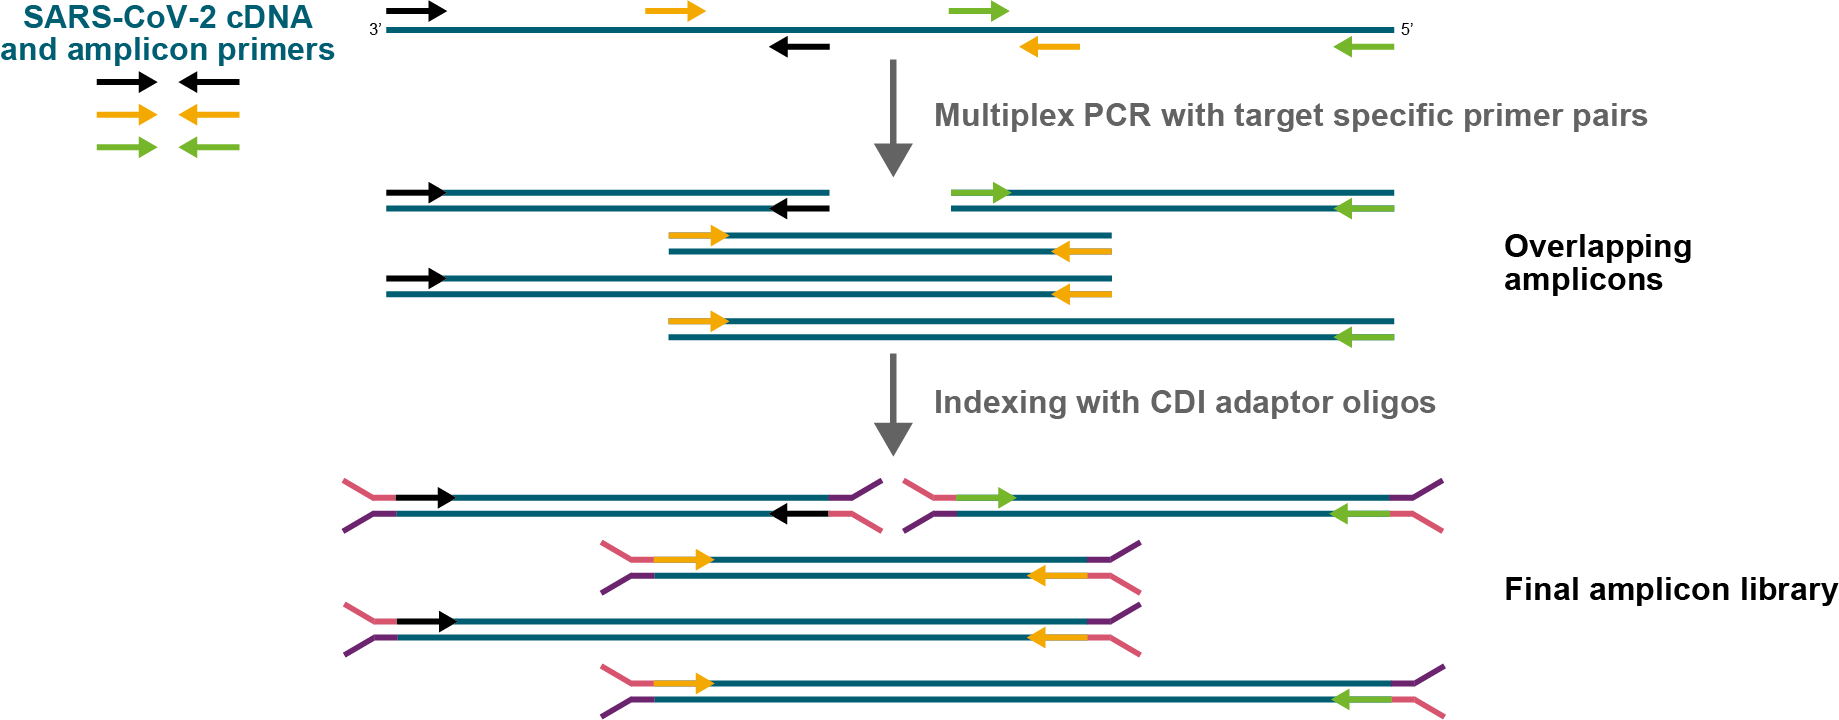 This figure illustrates the basic library preparation method used in this targeted amplicon-seq protocol